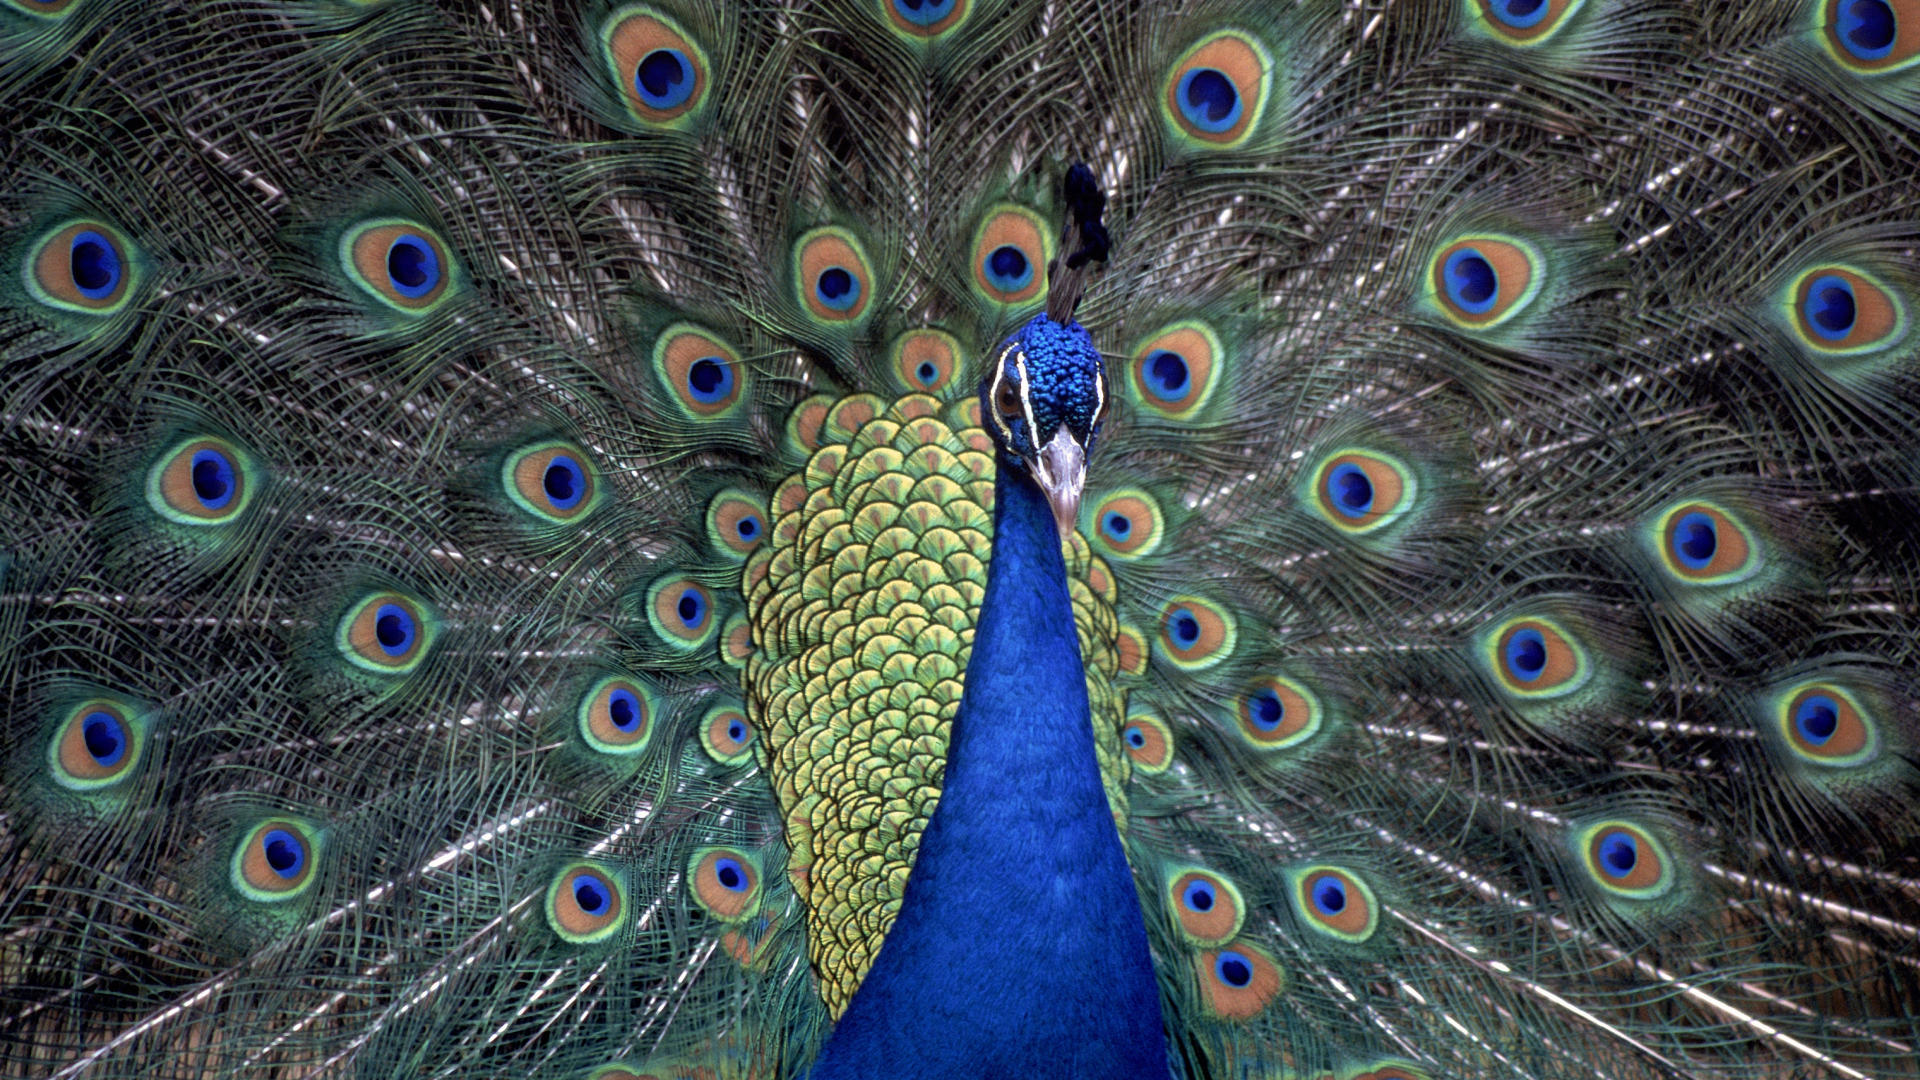 Peacock displaying colorful plumage in stunning detail.